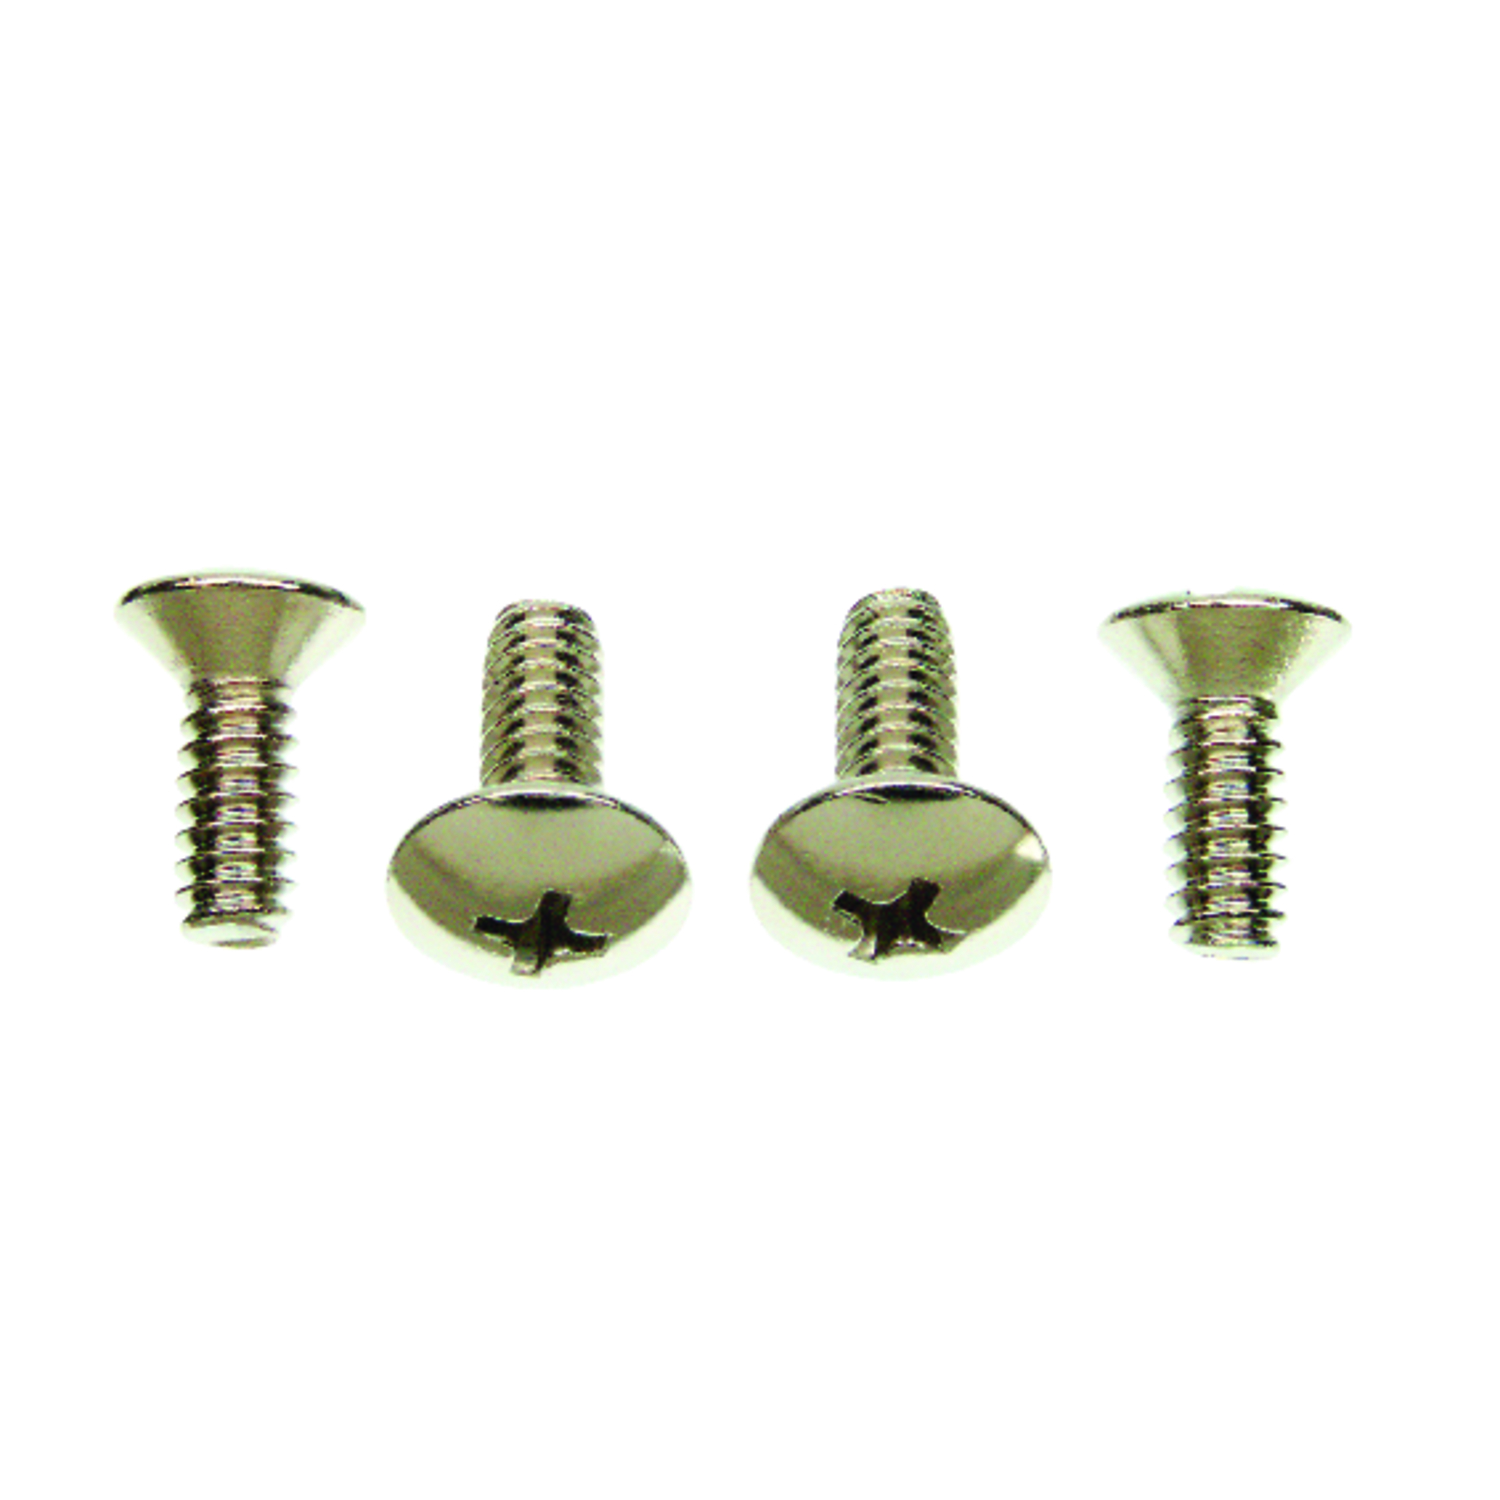 Ace Assorted in. X 3/4 in. L Slotted Flat Head Steel Handle Screw 4 pk